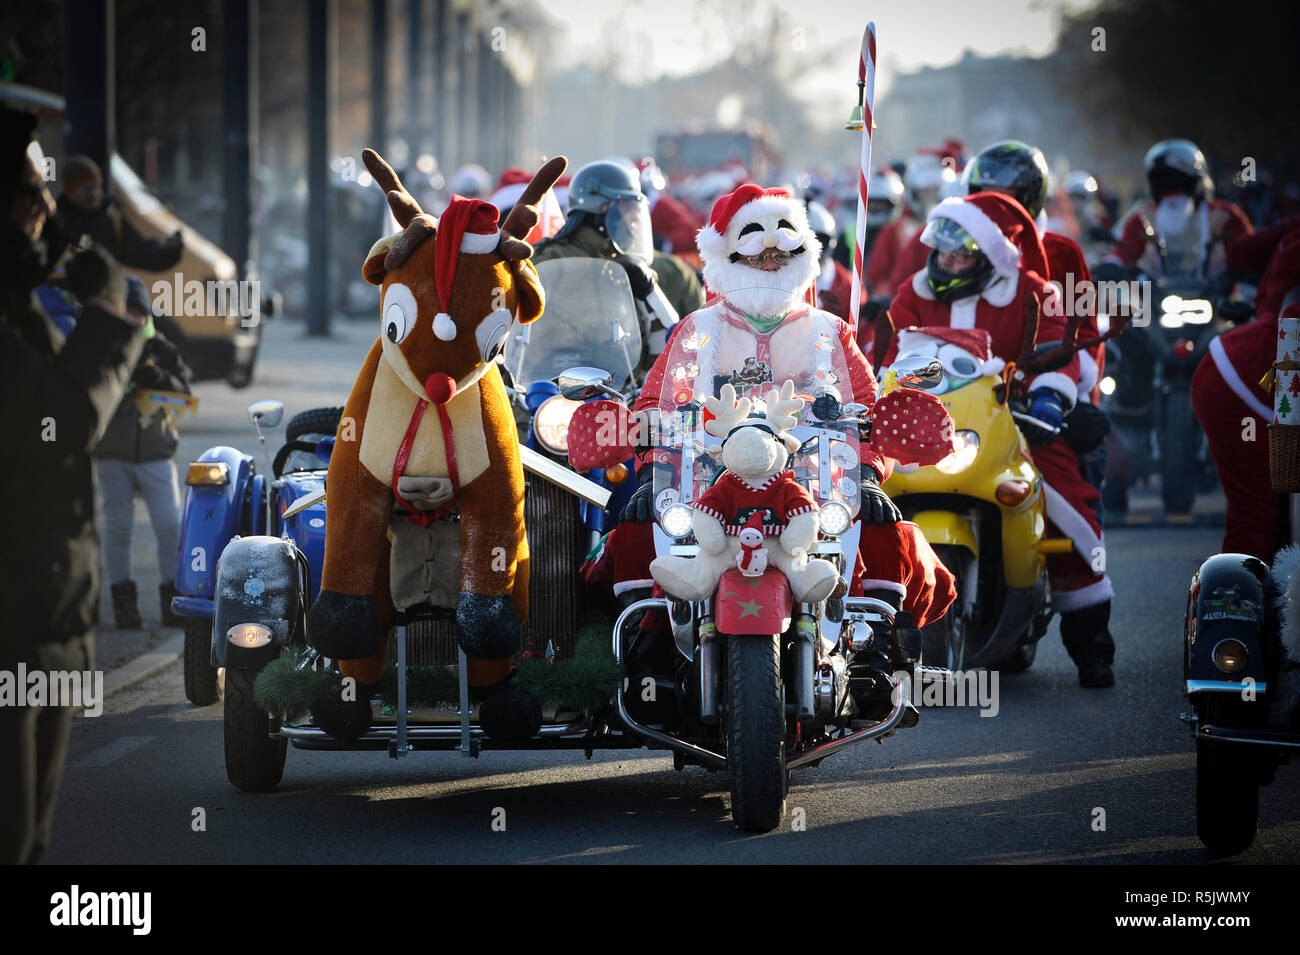 Warsaw, Poland. 1st Dec, 2018. A motorcade with motorcyclists dressed as  Santa Claus is seen in Warsaw, Poland, on Dec. 1, 2018. Every year Santa on  Motorcycle attracts thousands of motorcycle enthusiasts